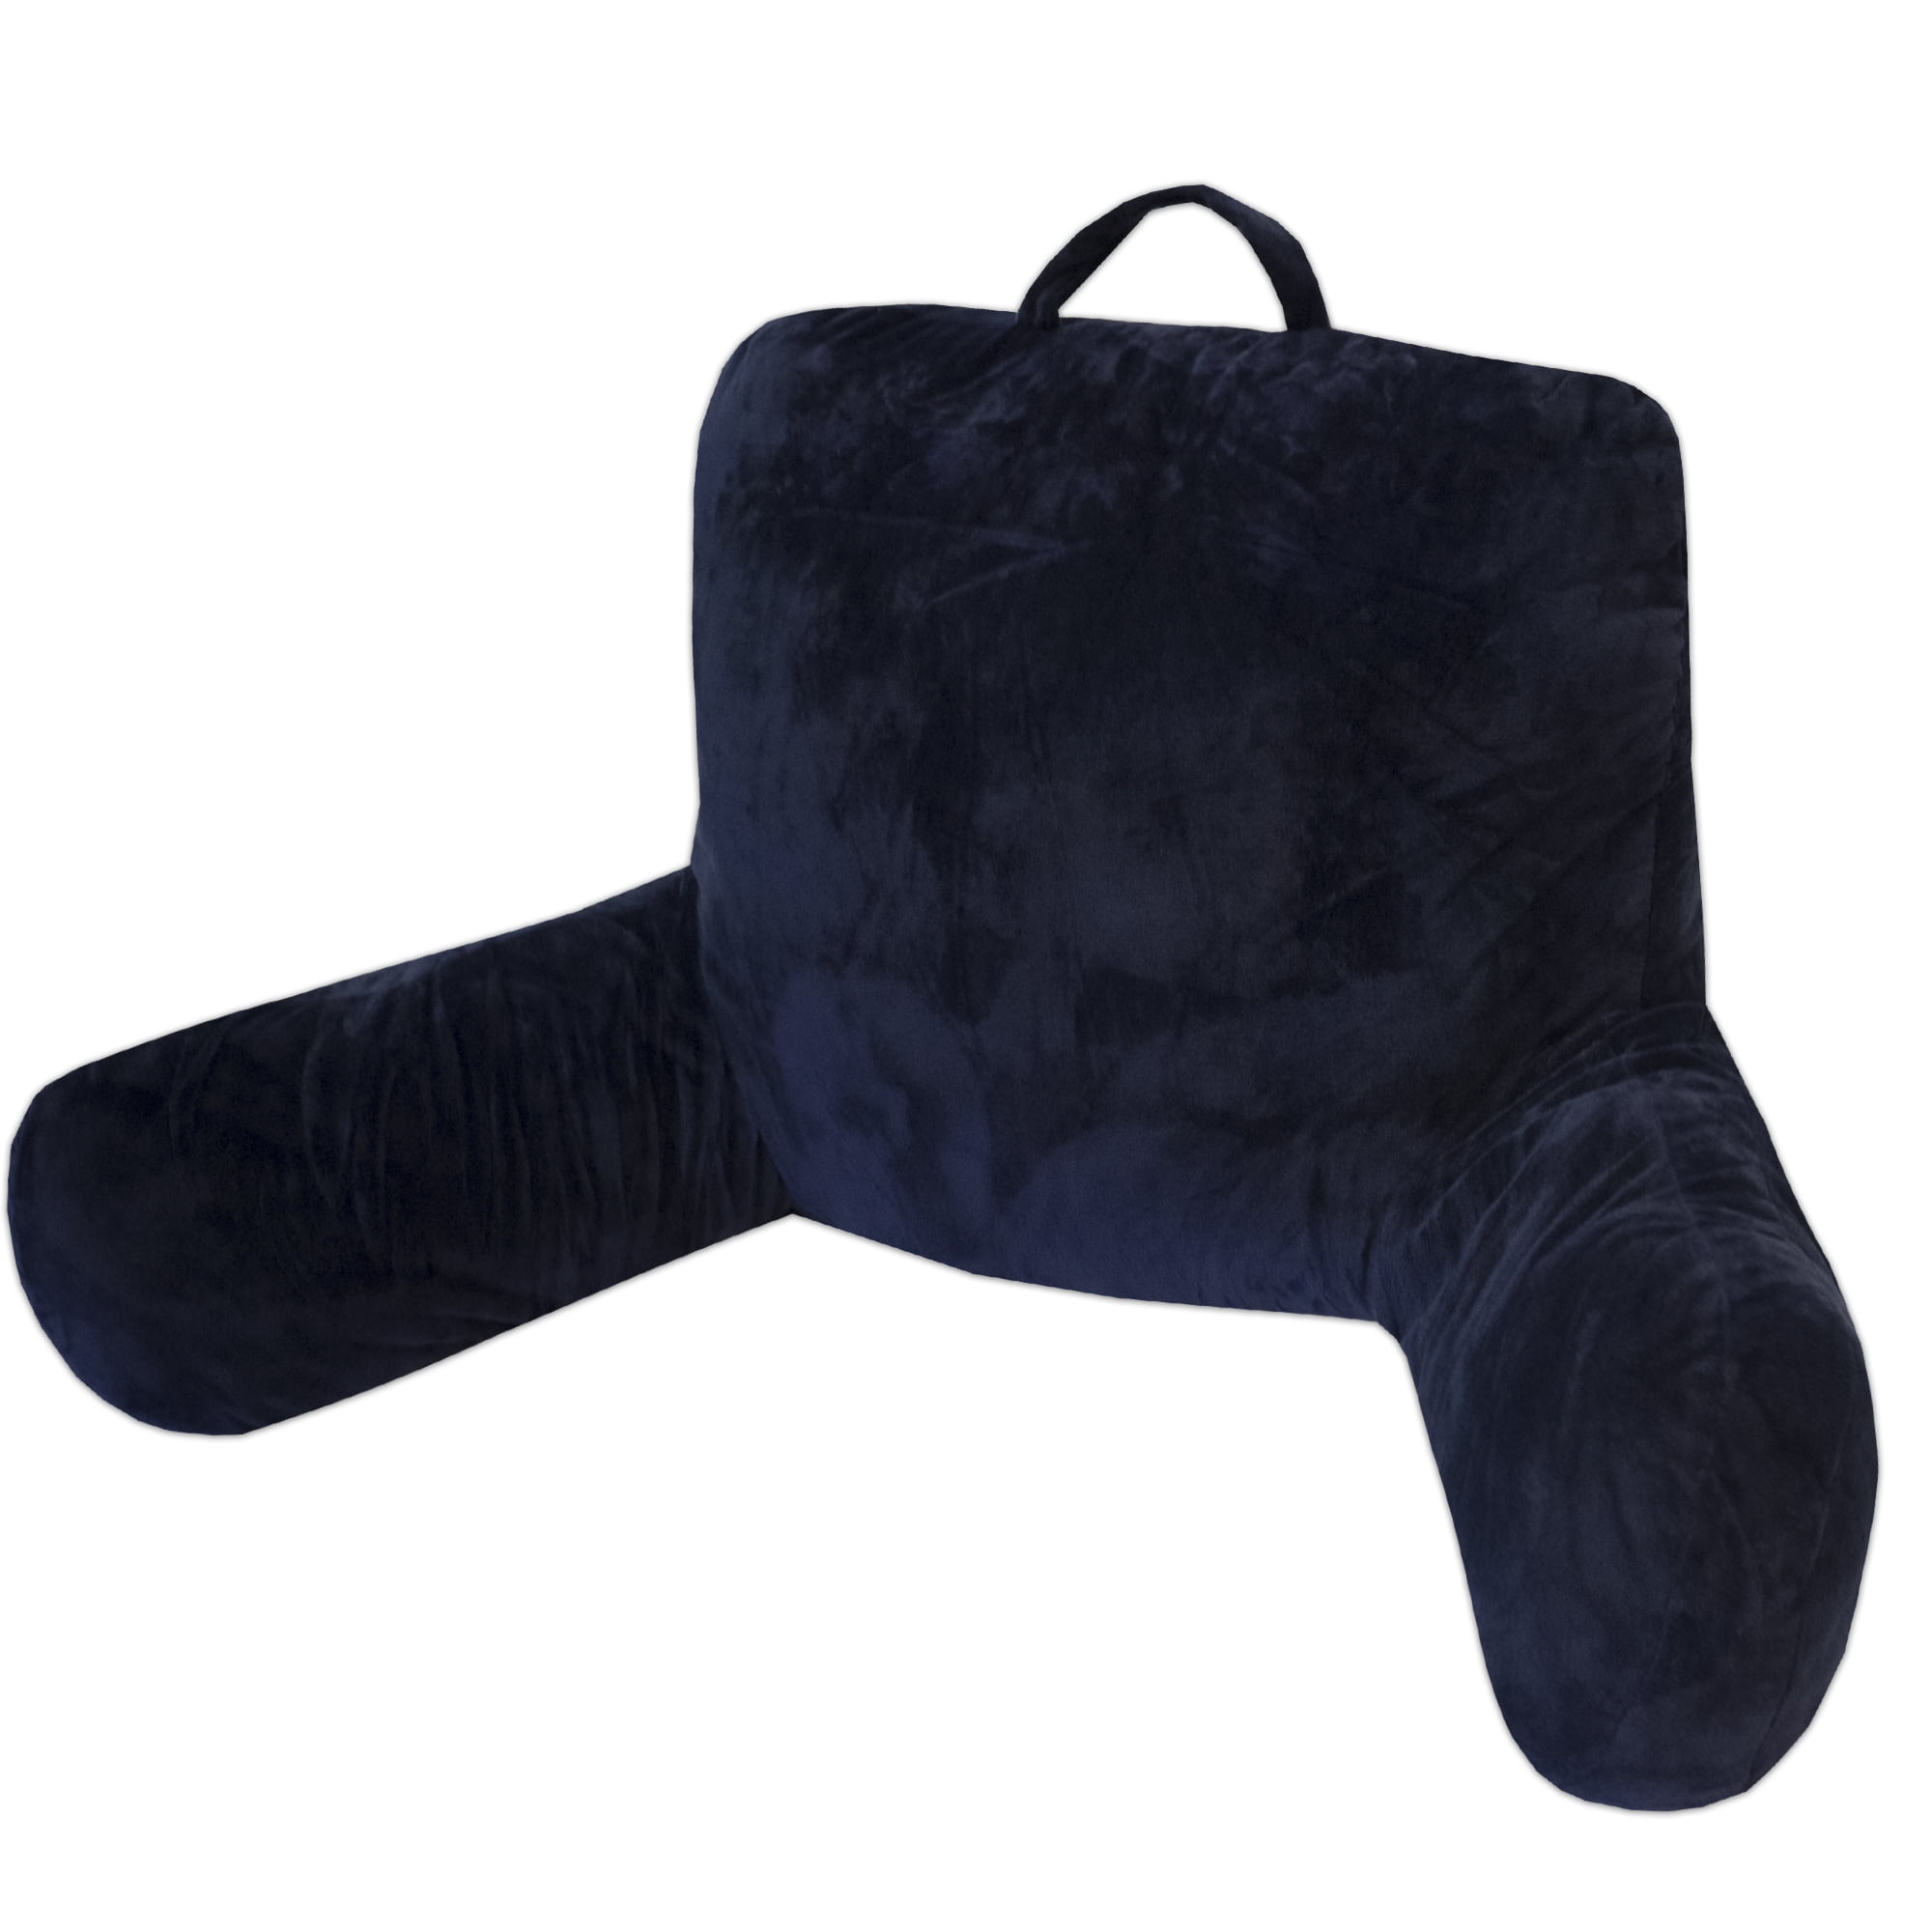 Micro Plush Bed Rest Lounger, Black, Specialty